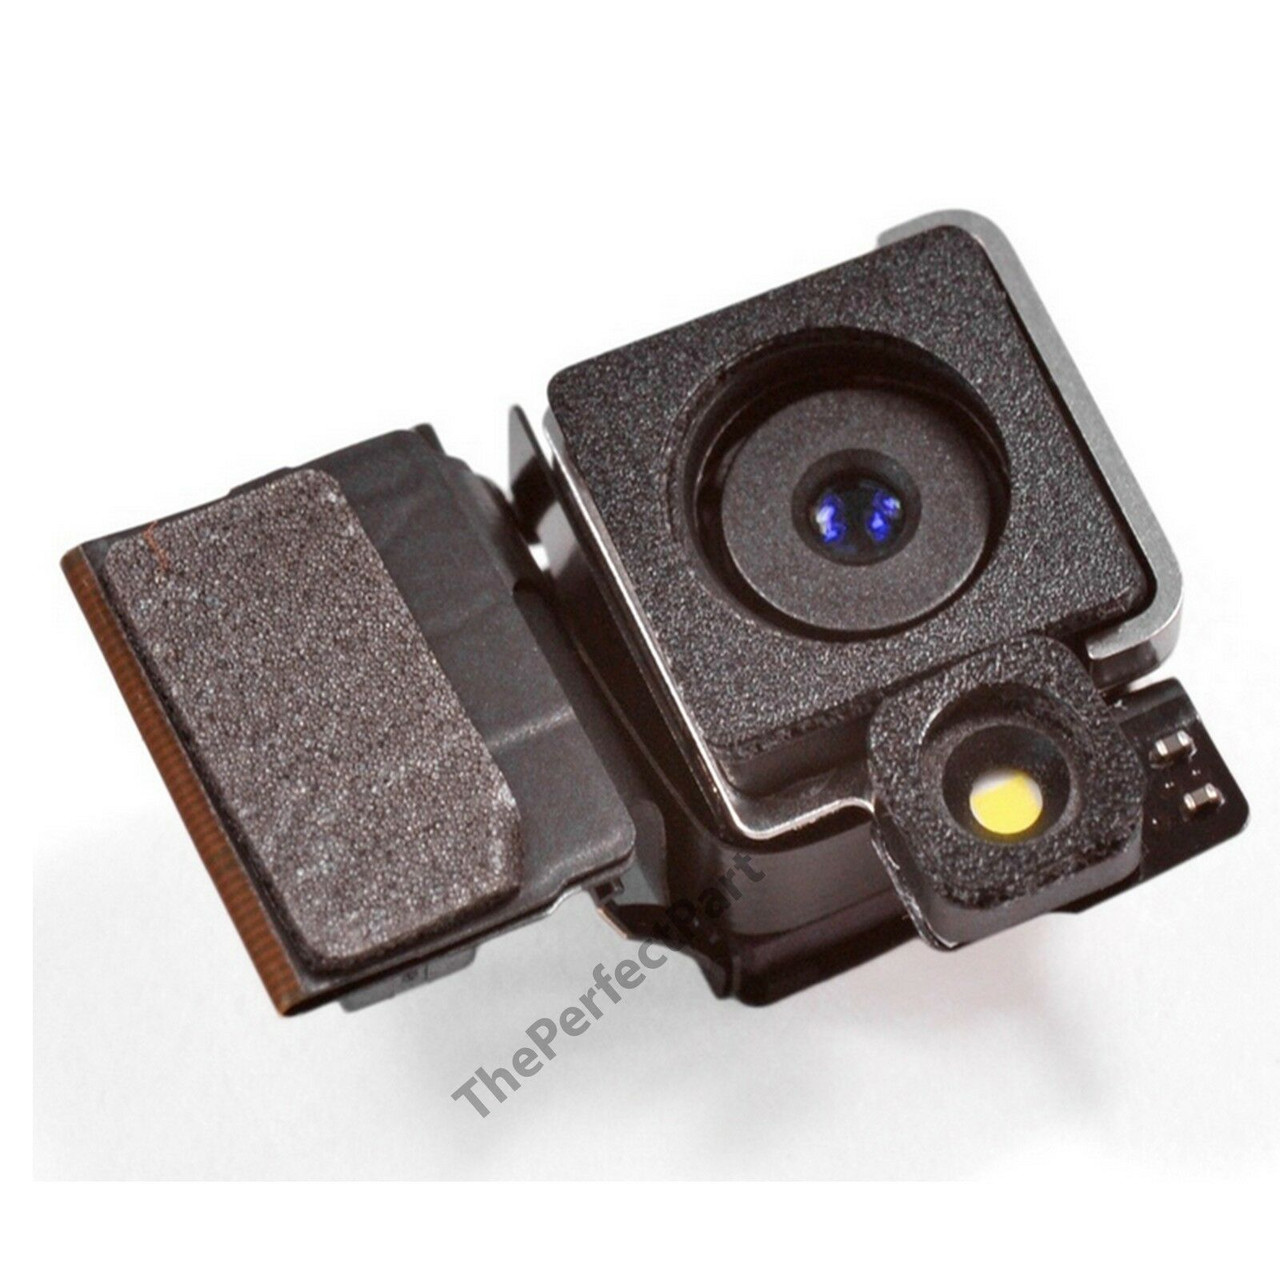 OEM SPEC Back Rear 8MP Camera Replacement With Flash Focus for Apple iPhone 4S